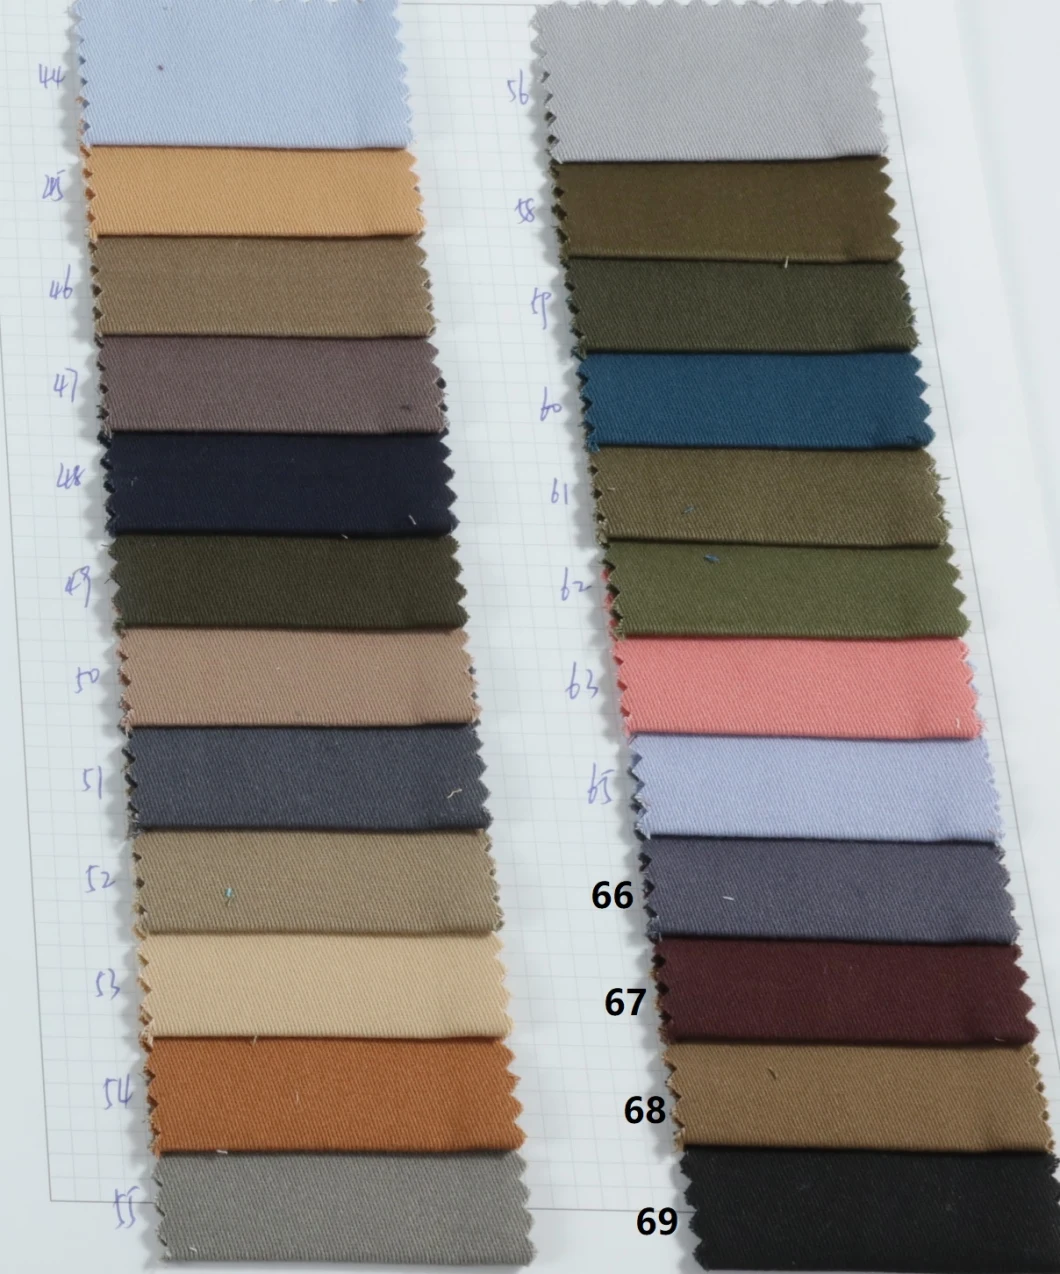 Fashion Stock 100 Cotton Woven Plain Carbon Peach Twill Spandex Dyed Fabric for Garment Fabric